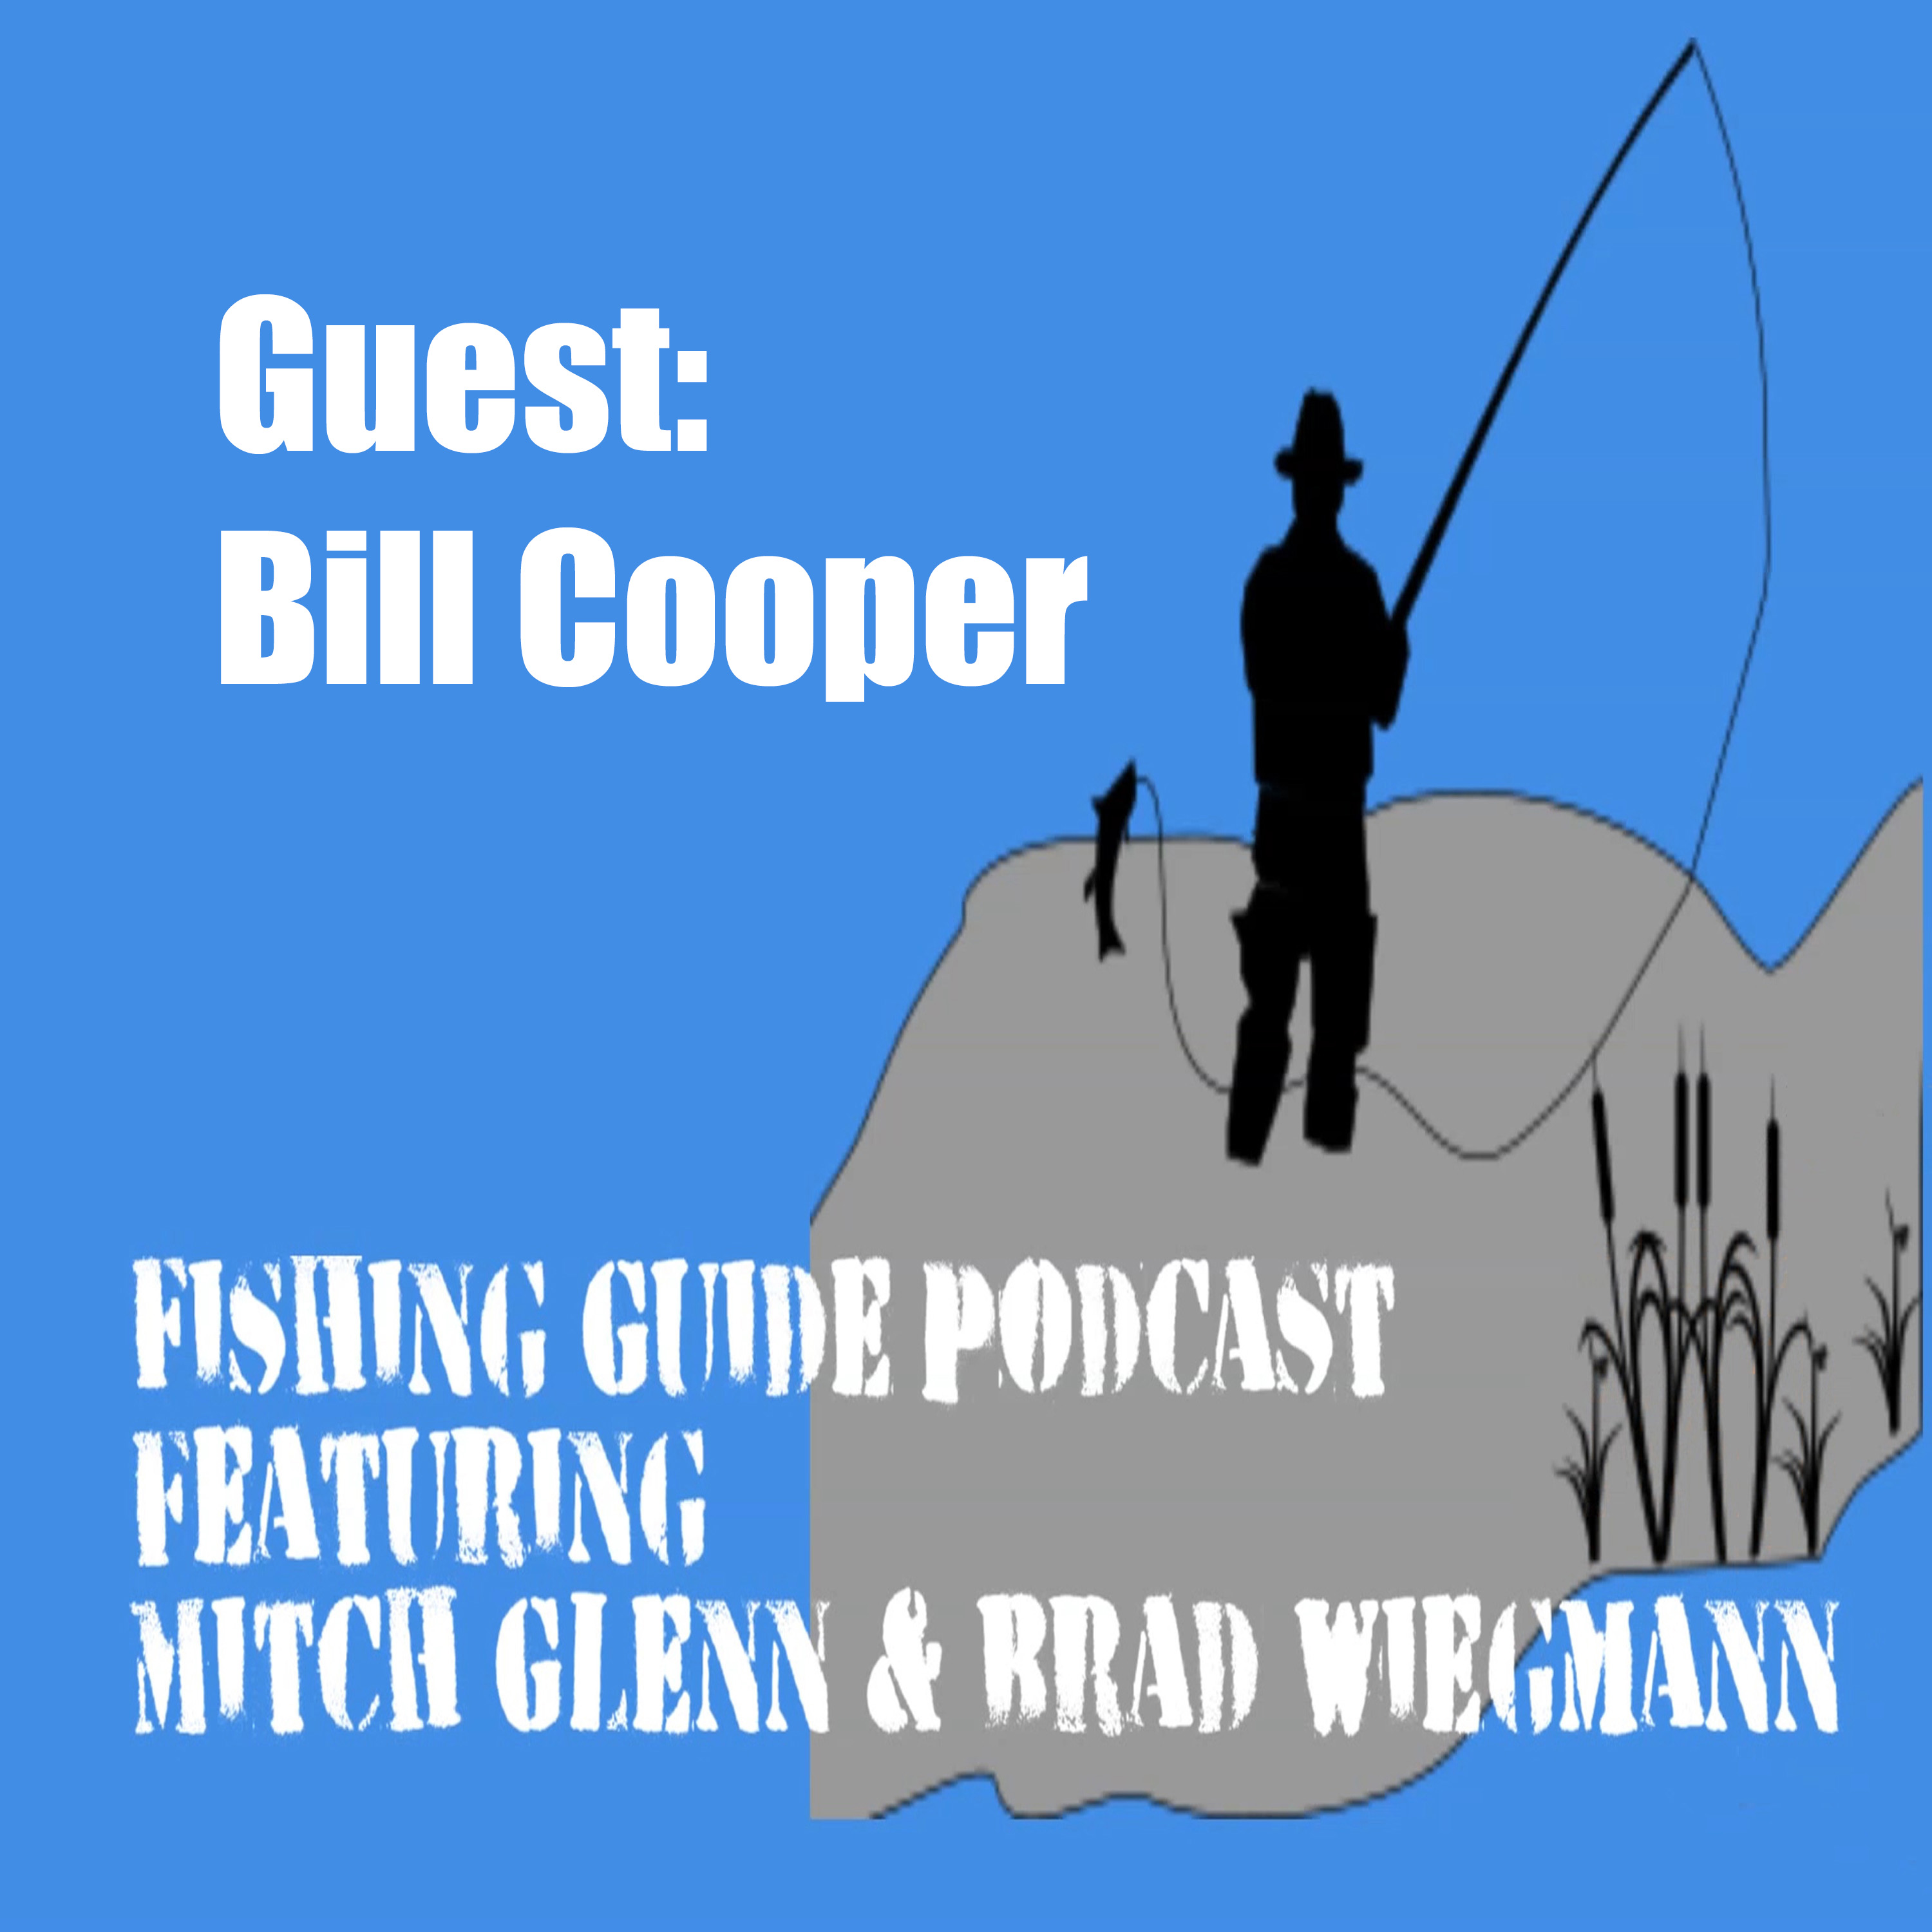 Bill Cooper Fresh Water Fishing Hall of Fame inductee, outdoor journalist and photographer along with hosting his own radio show and online TV show